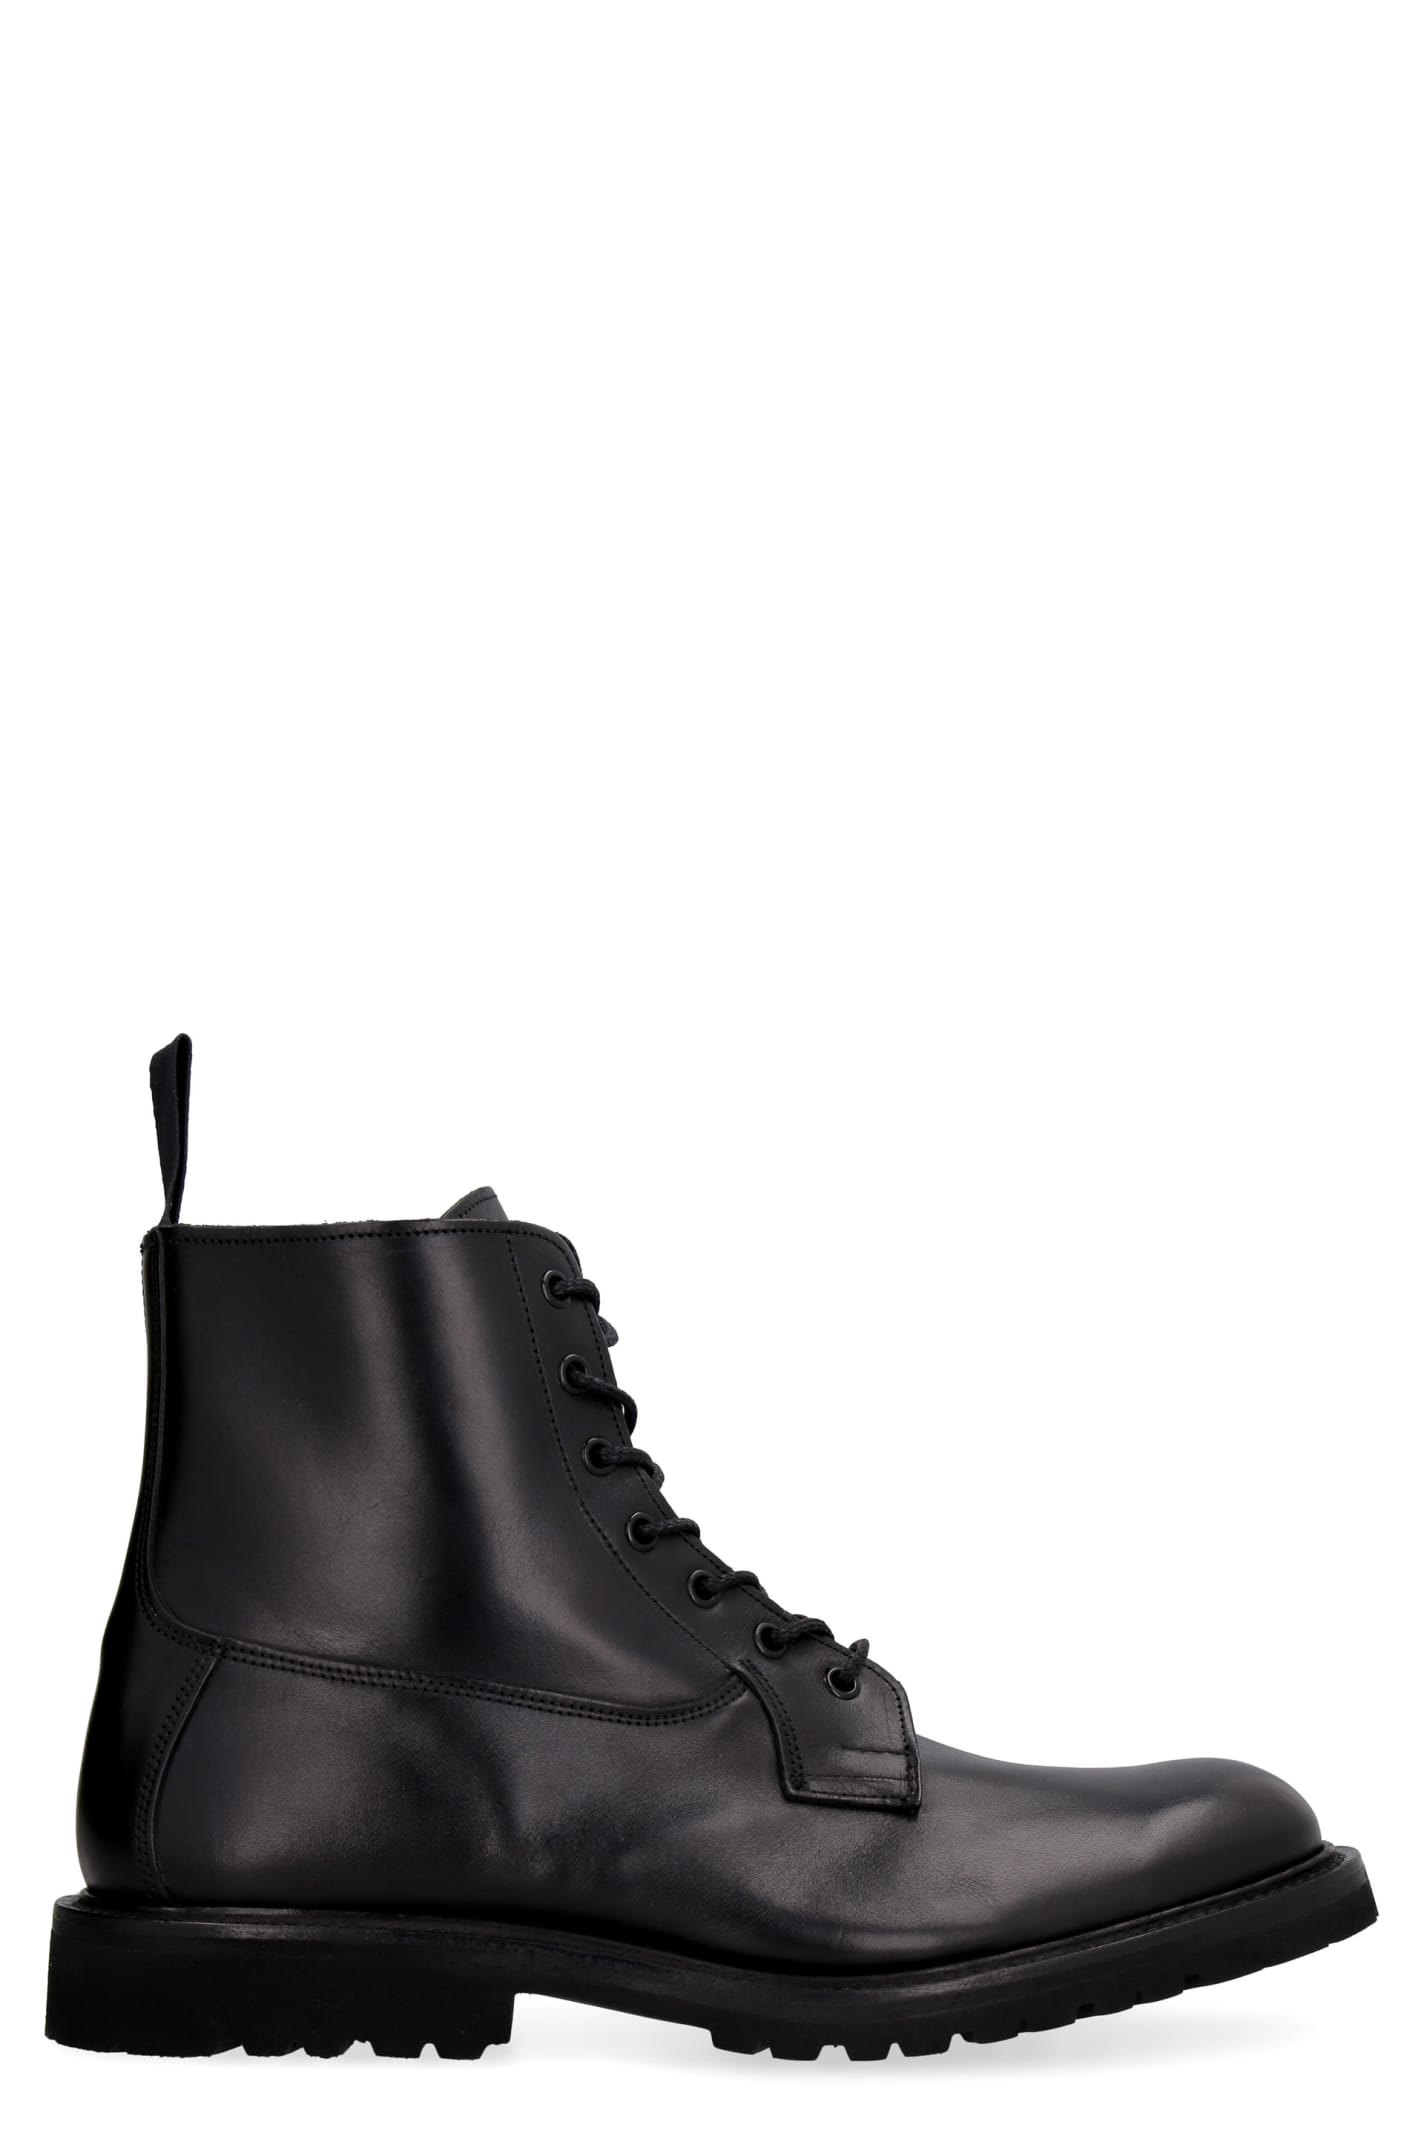 Trickers Burford Leather Lace-up Boots